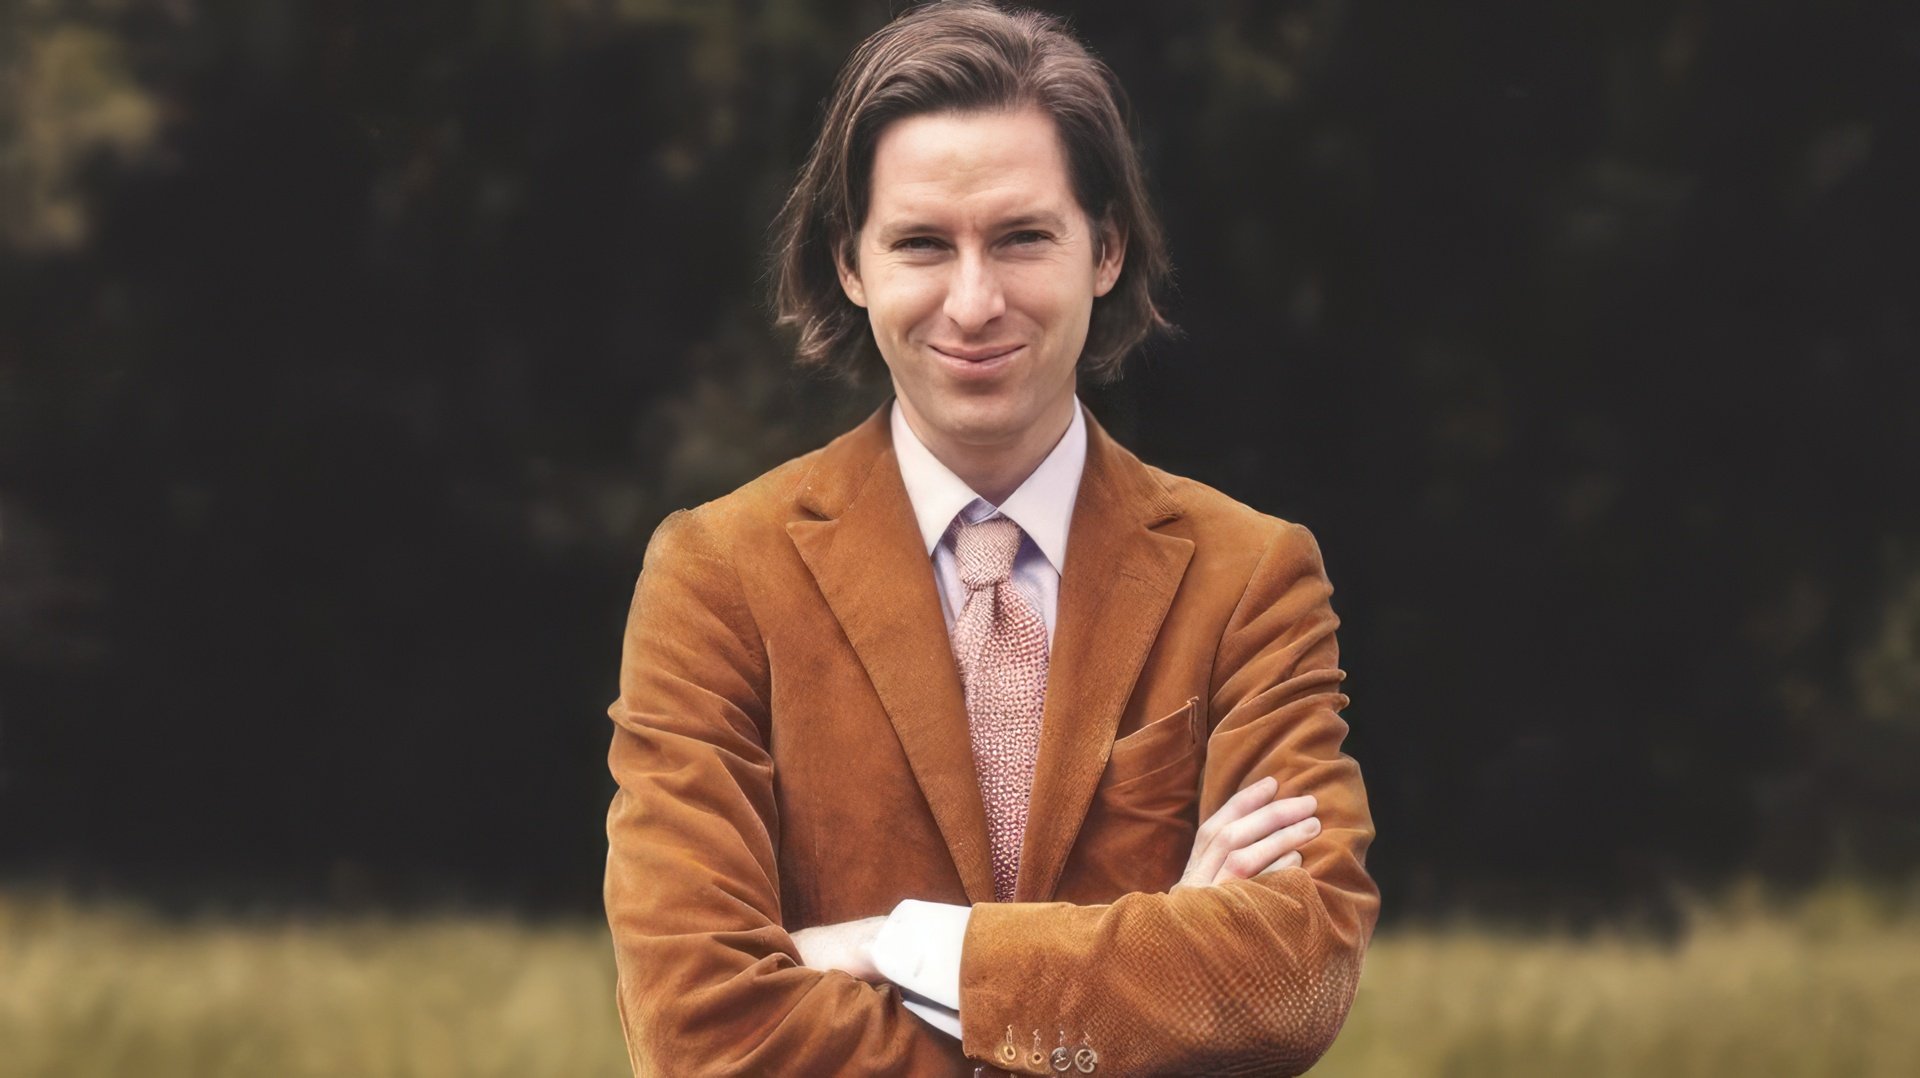 Wes Anderson continues to make unusual films and delight fans